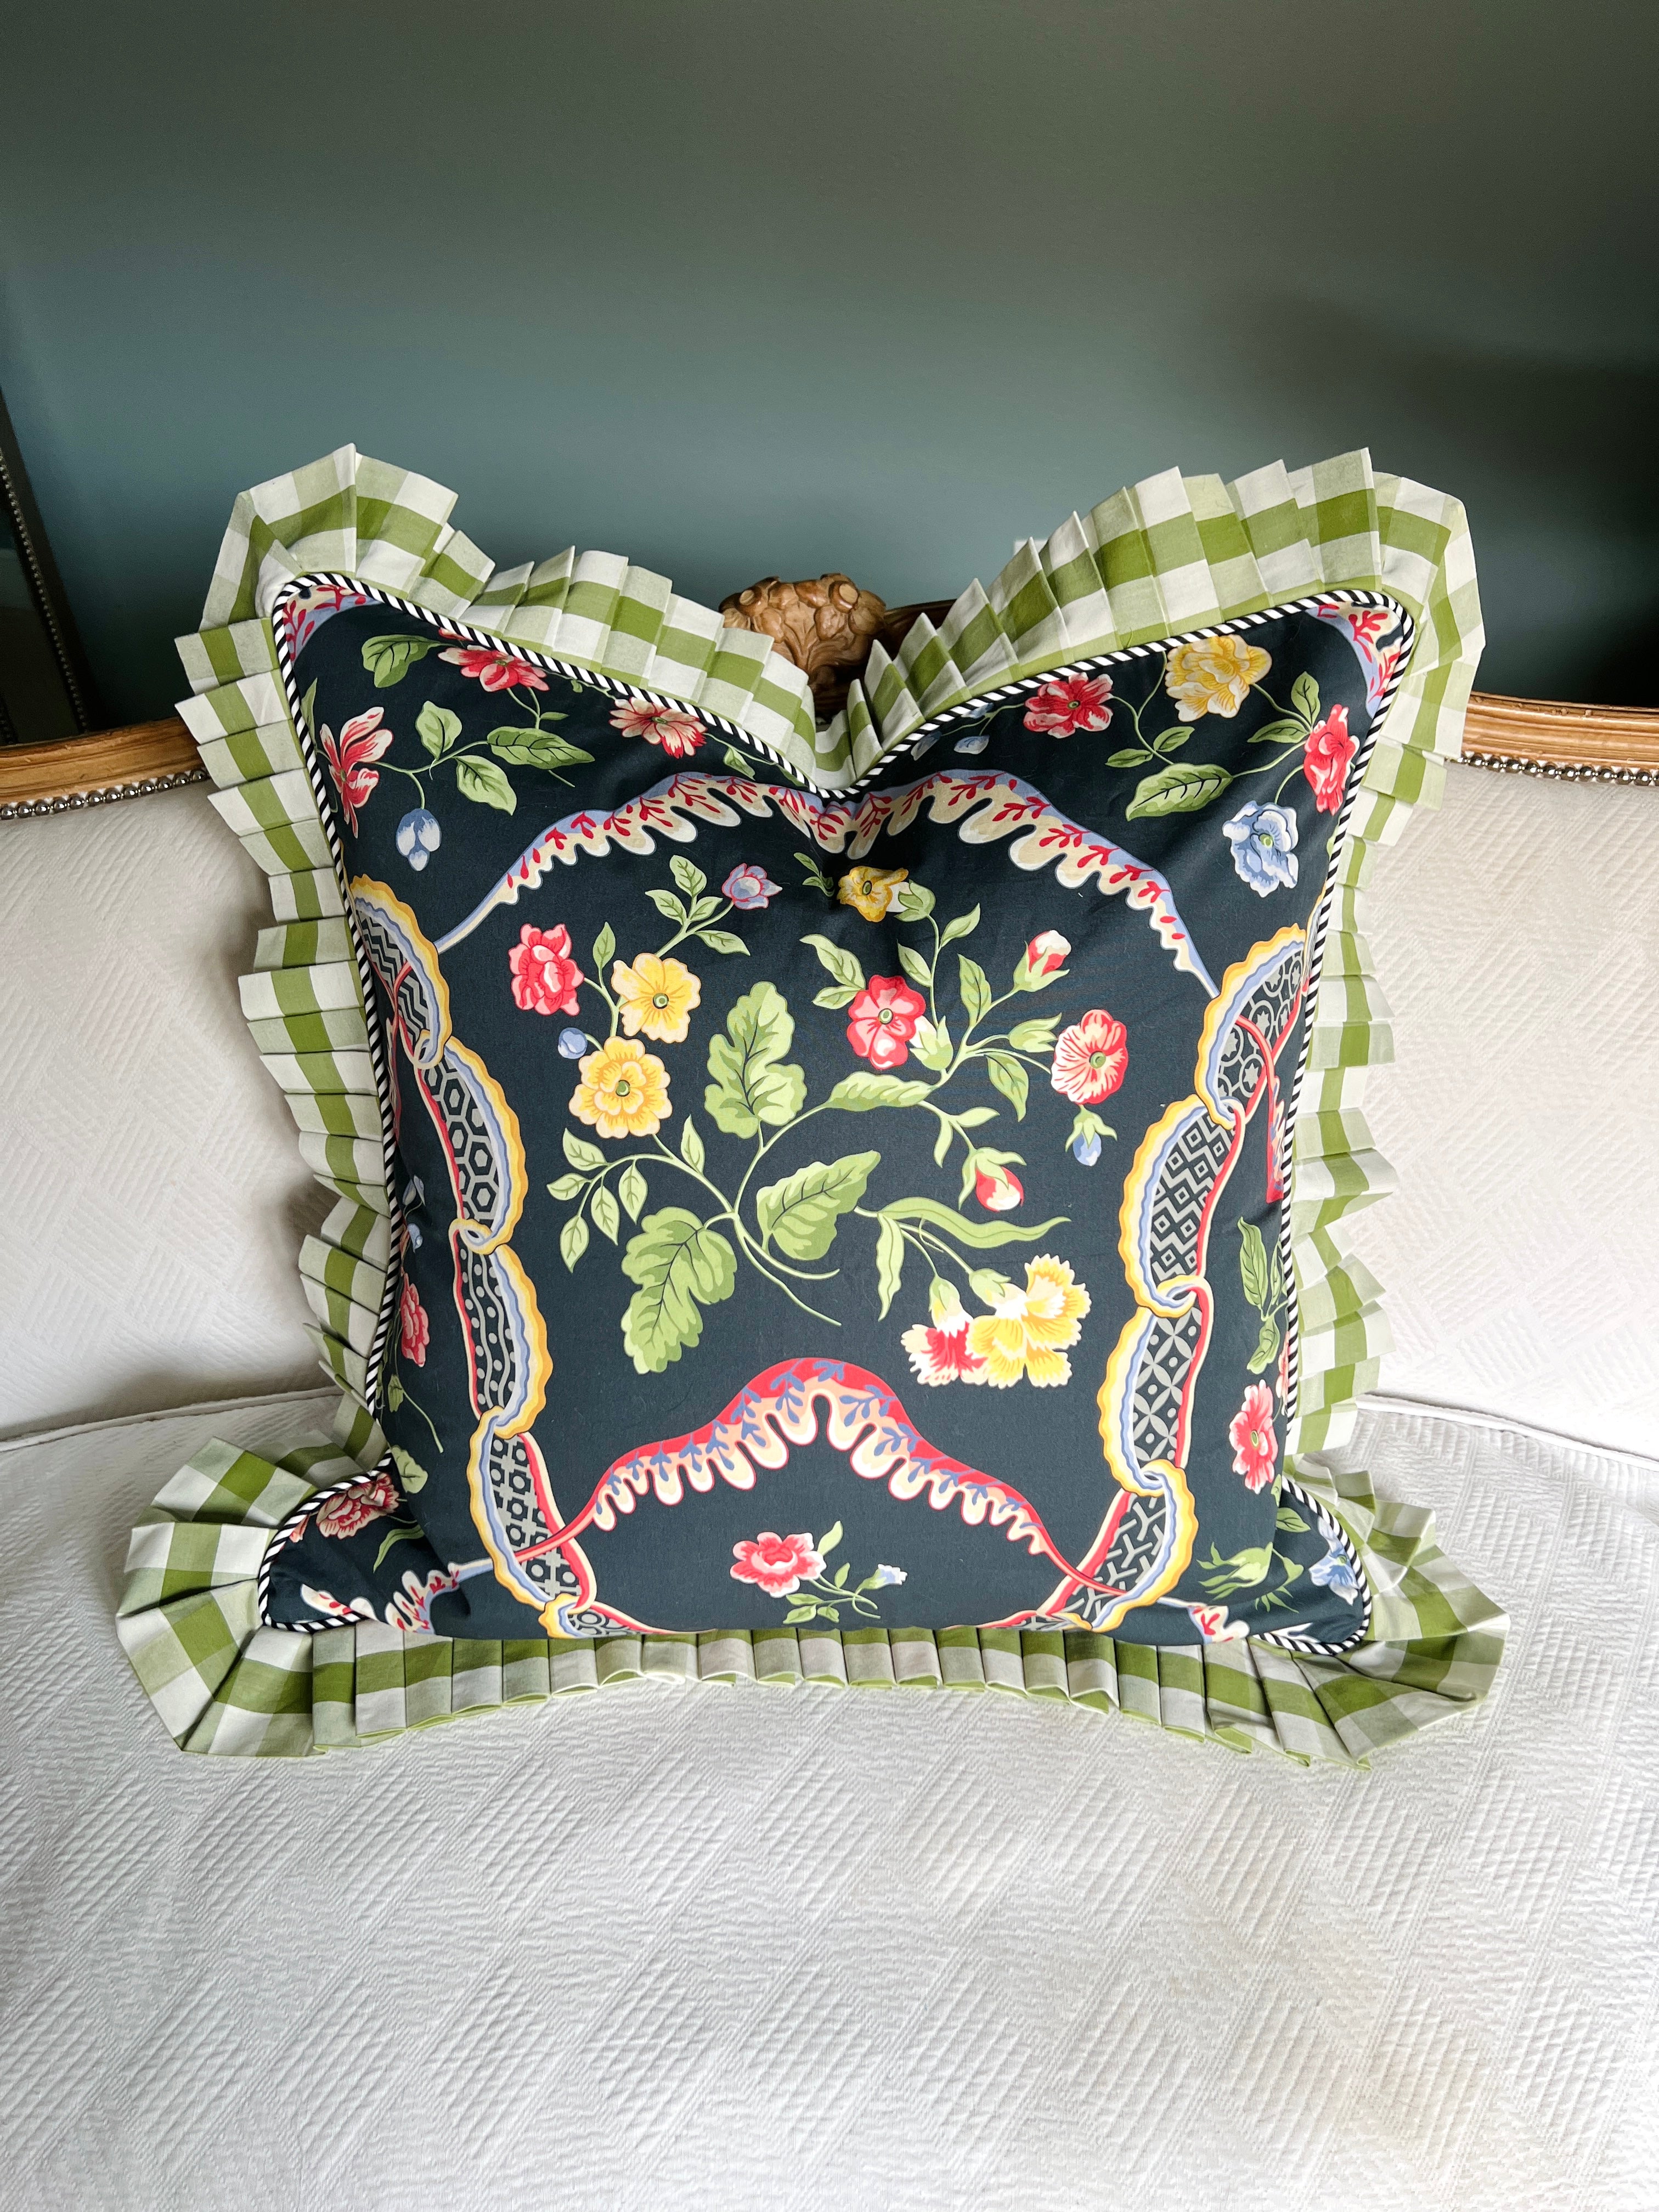 Scalamandre black floral pillow with boxed ruffle trim